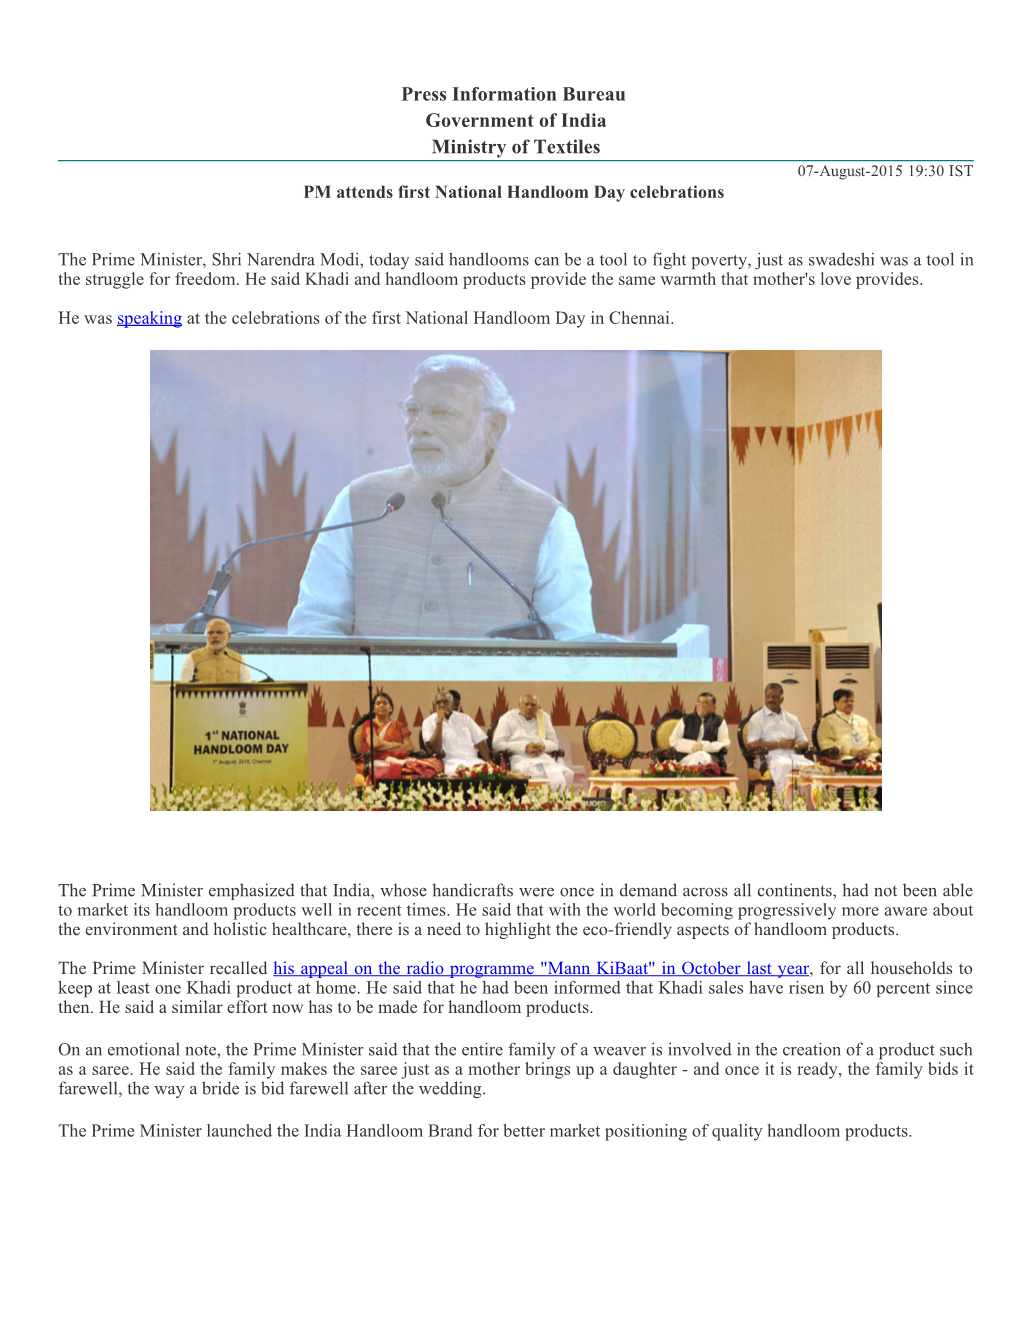 Press Information Bureau Government of India Ministry of Textiles 07­August­2015 19:30 IST PM Attends First National Handloom Day Celebrations